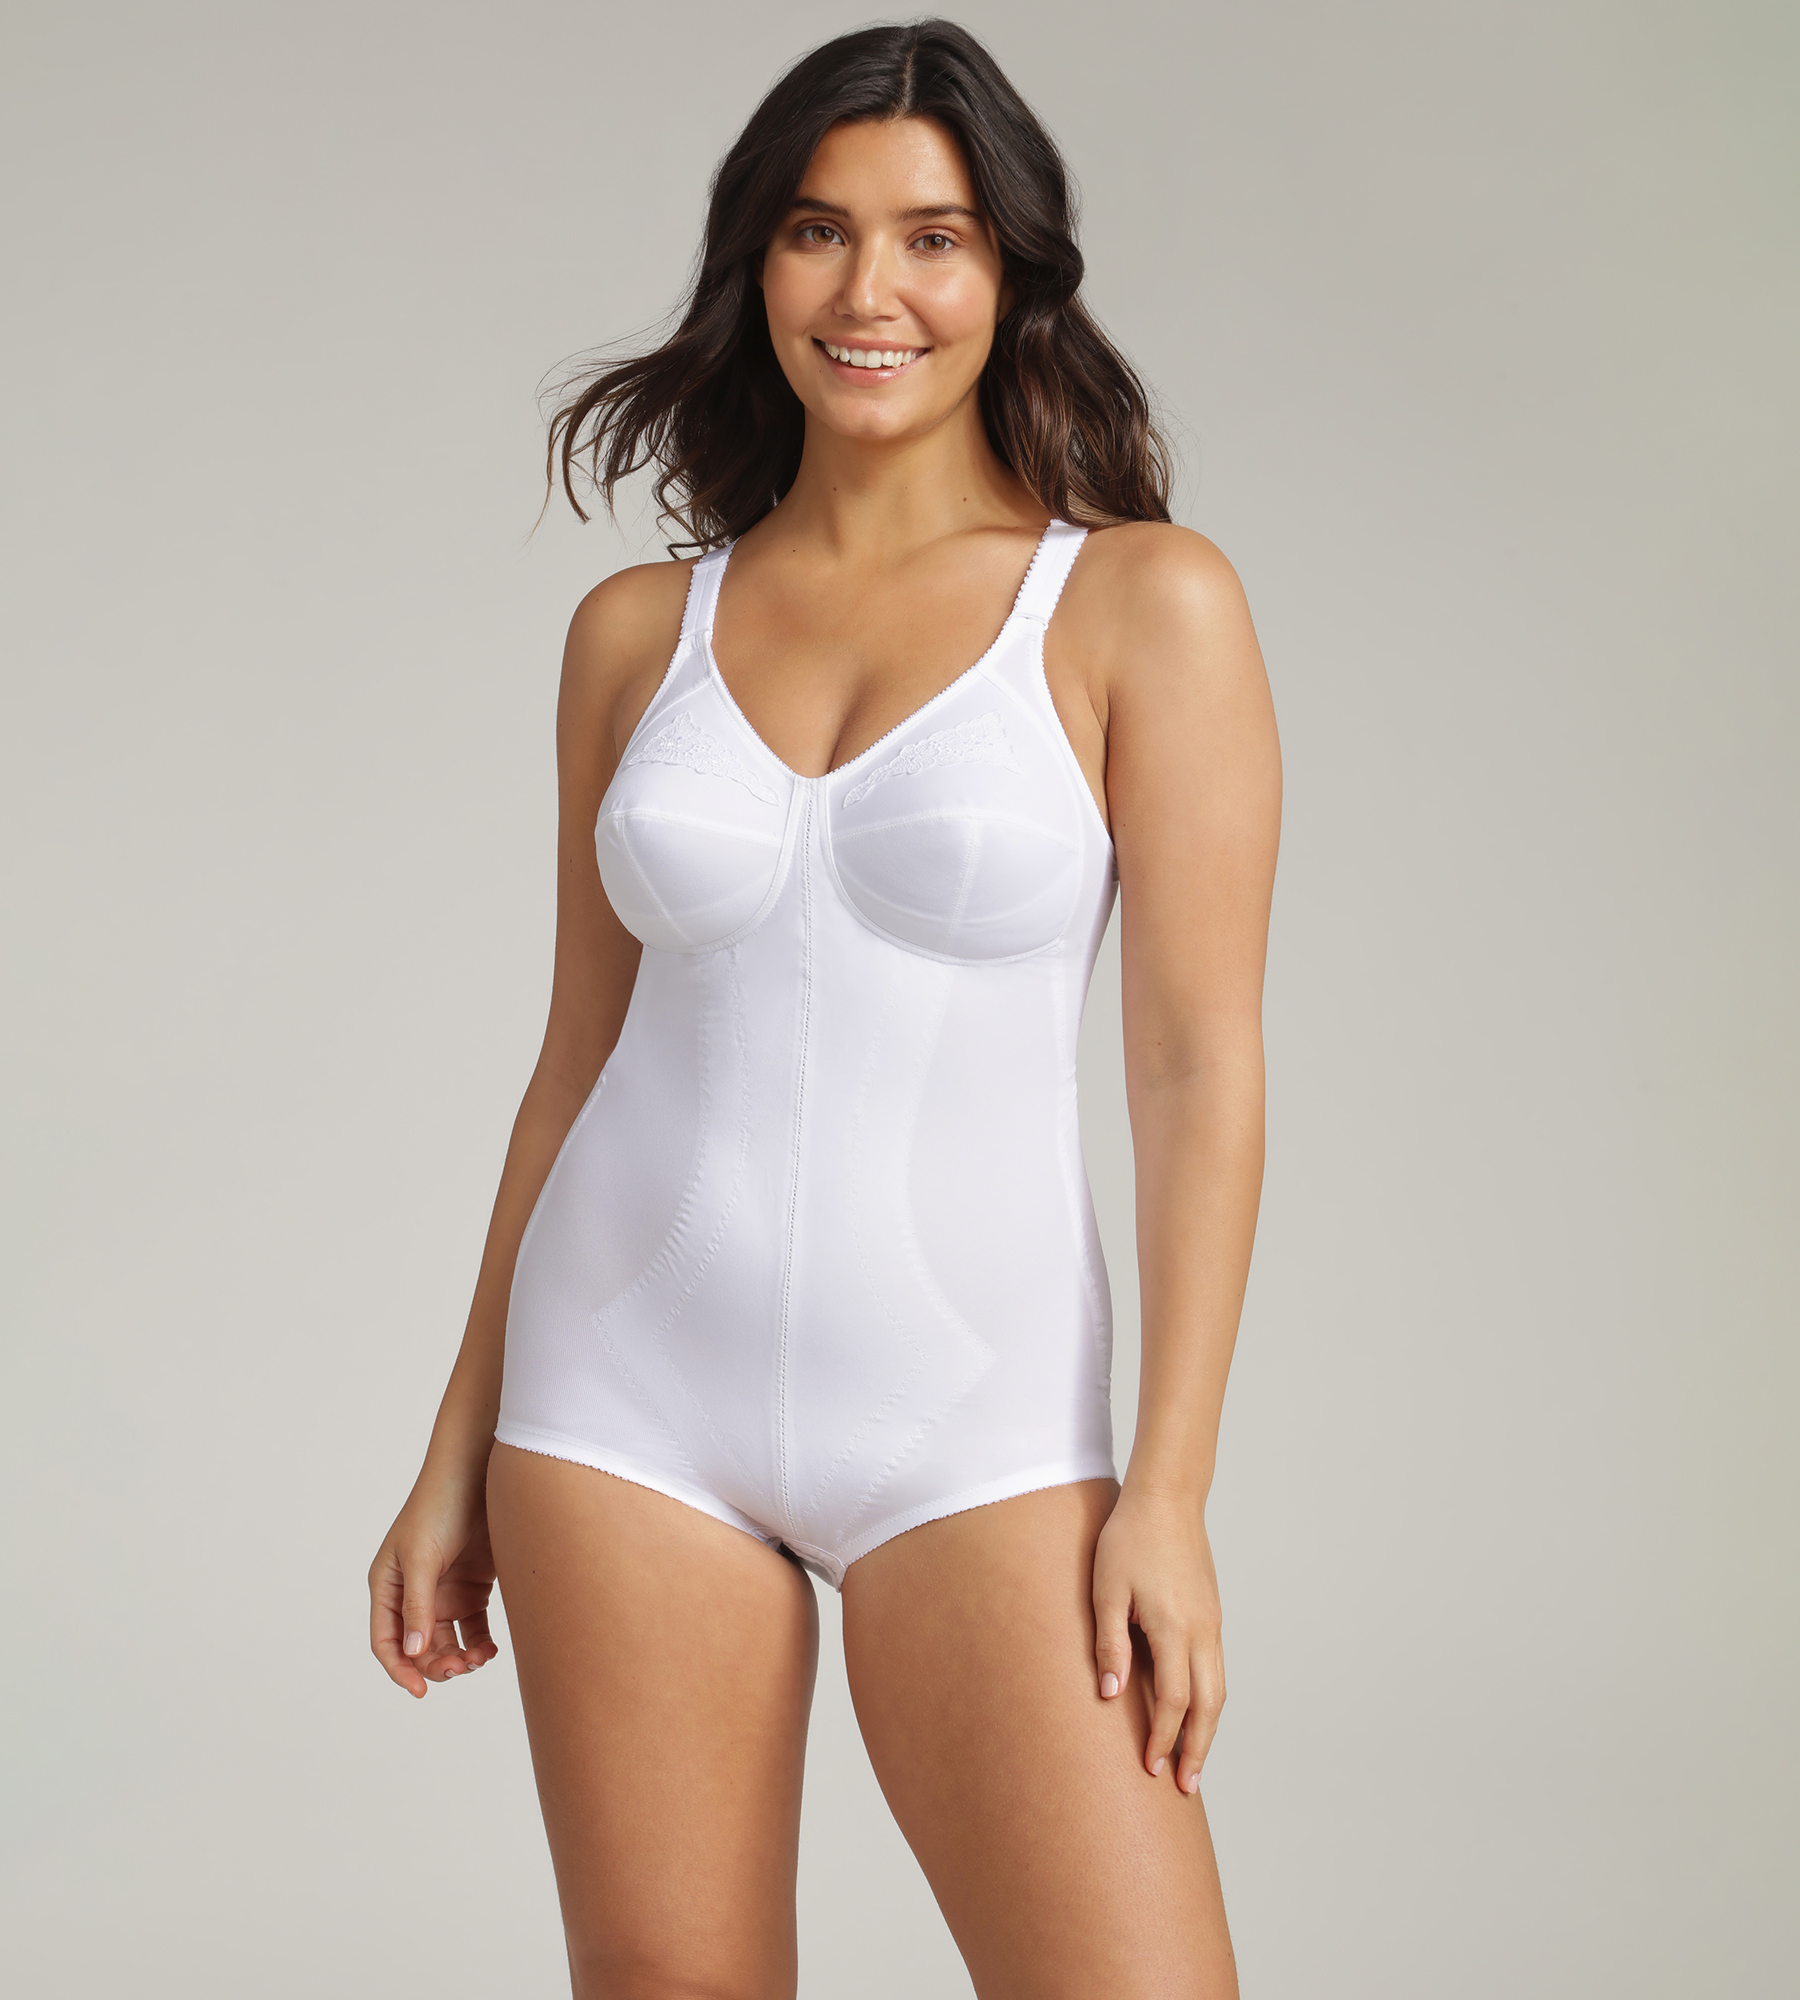 All-in-one Girdle in White – I Can’t Believe It’s A Girdle, , PLAYTEX